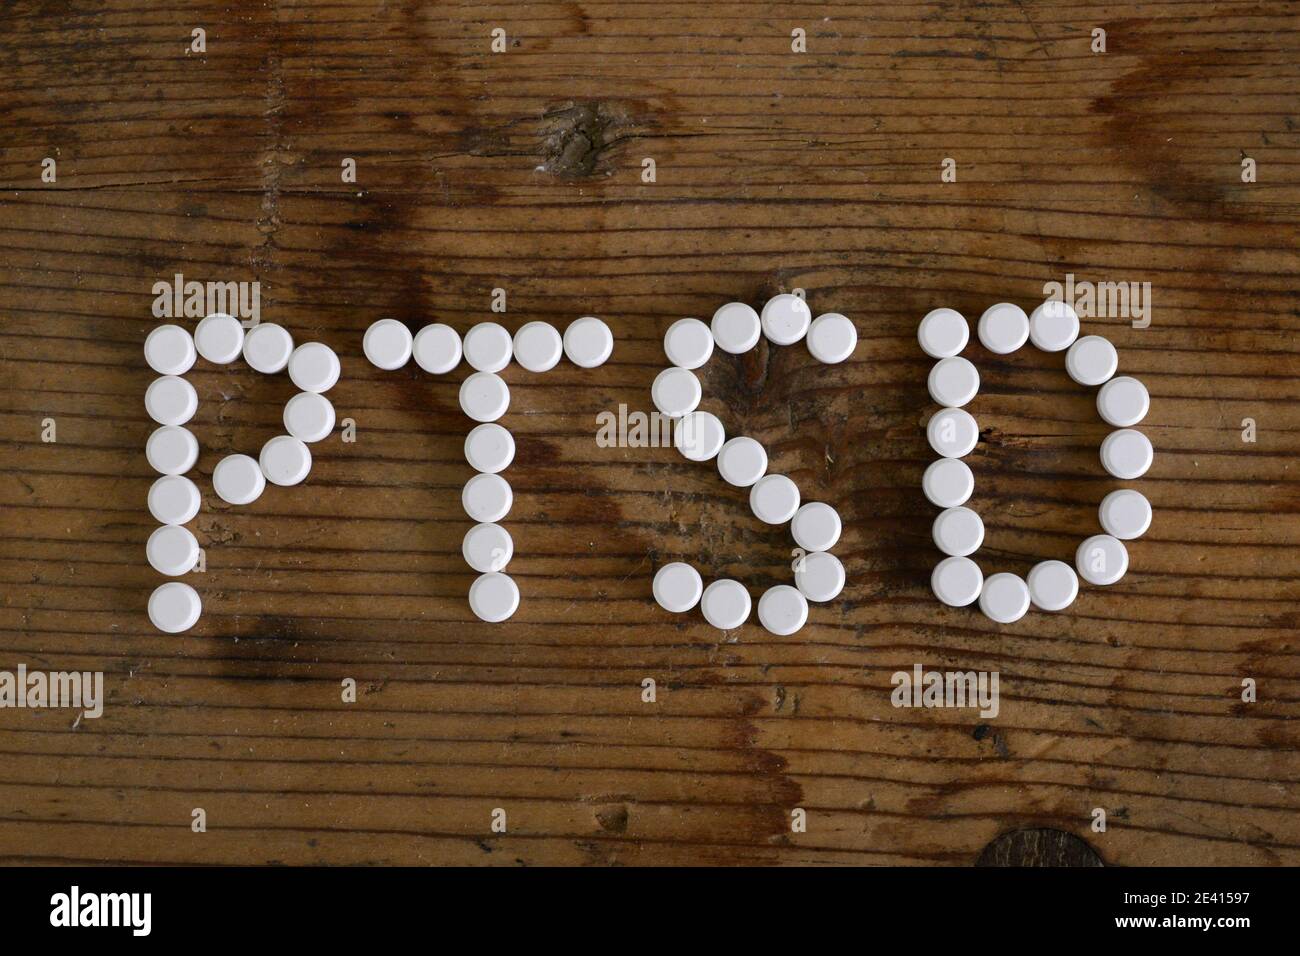 text Ptsd. writing with pills on wooden table . Concept meaning Post Traumatic Stress Disorder Mental Illness Trauma Fear Depression. Stock Photo